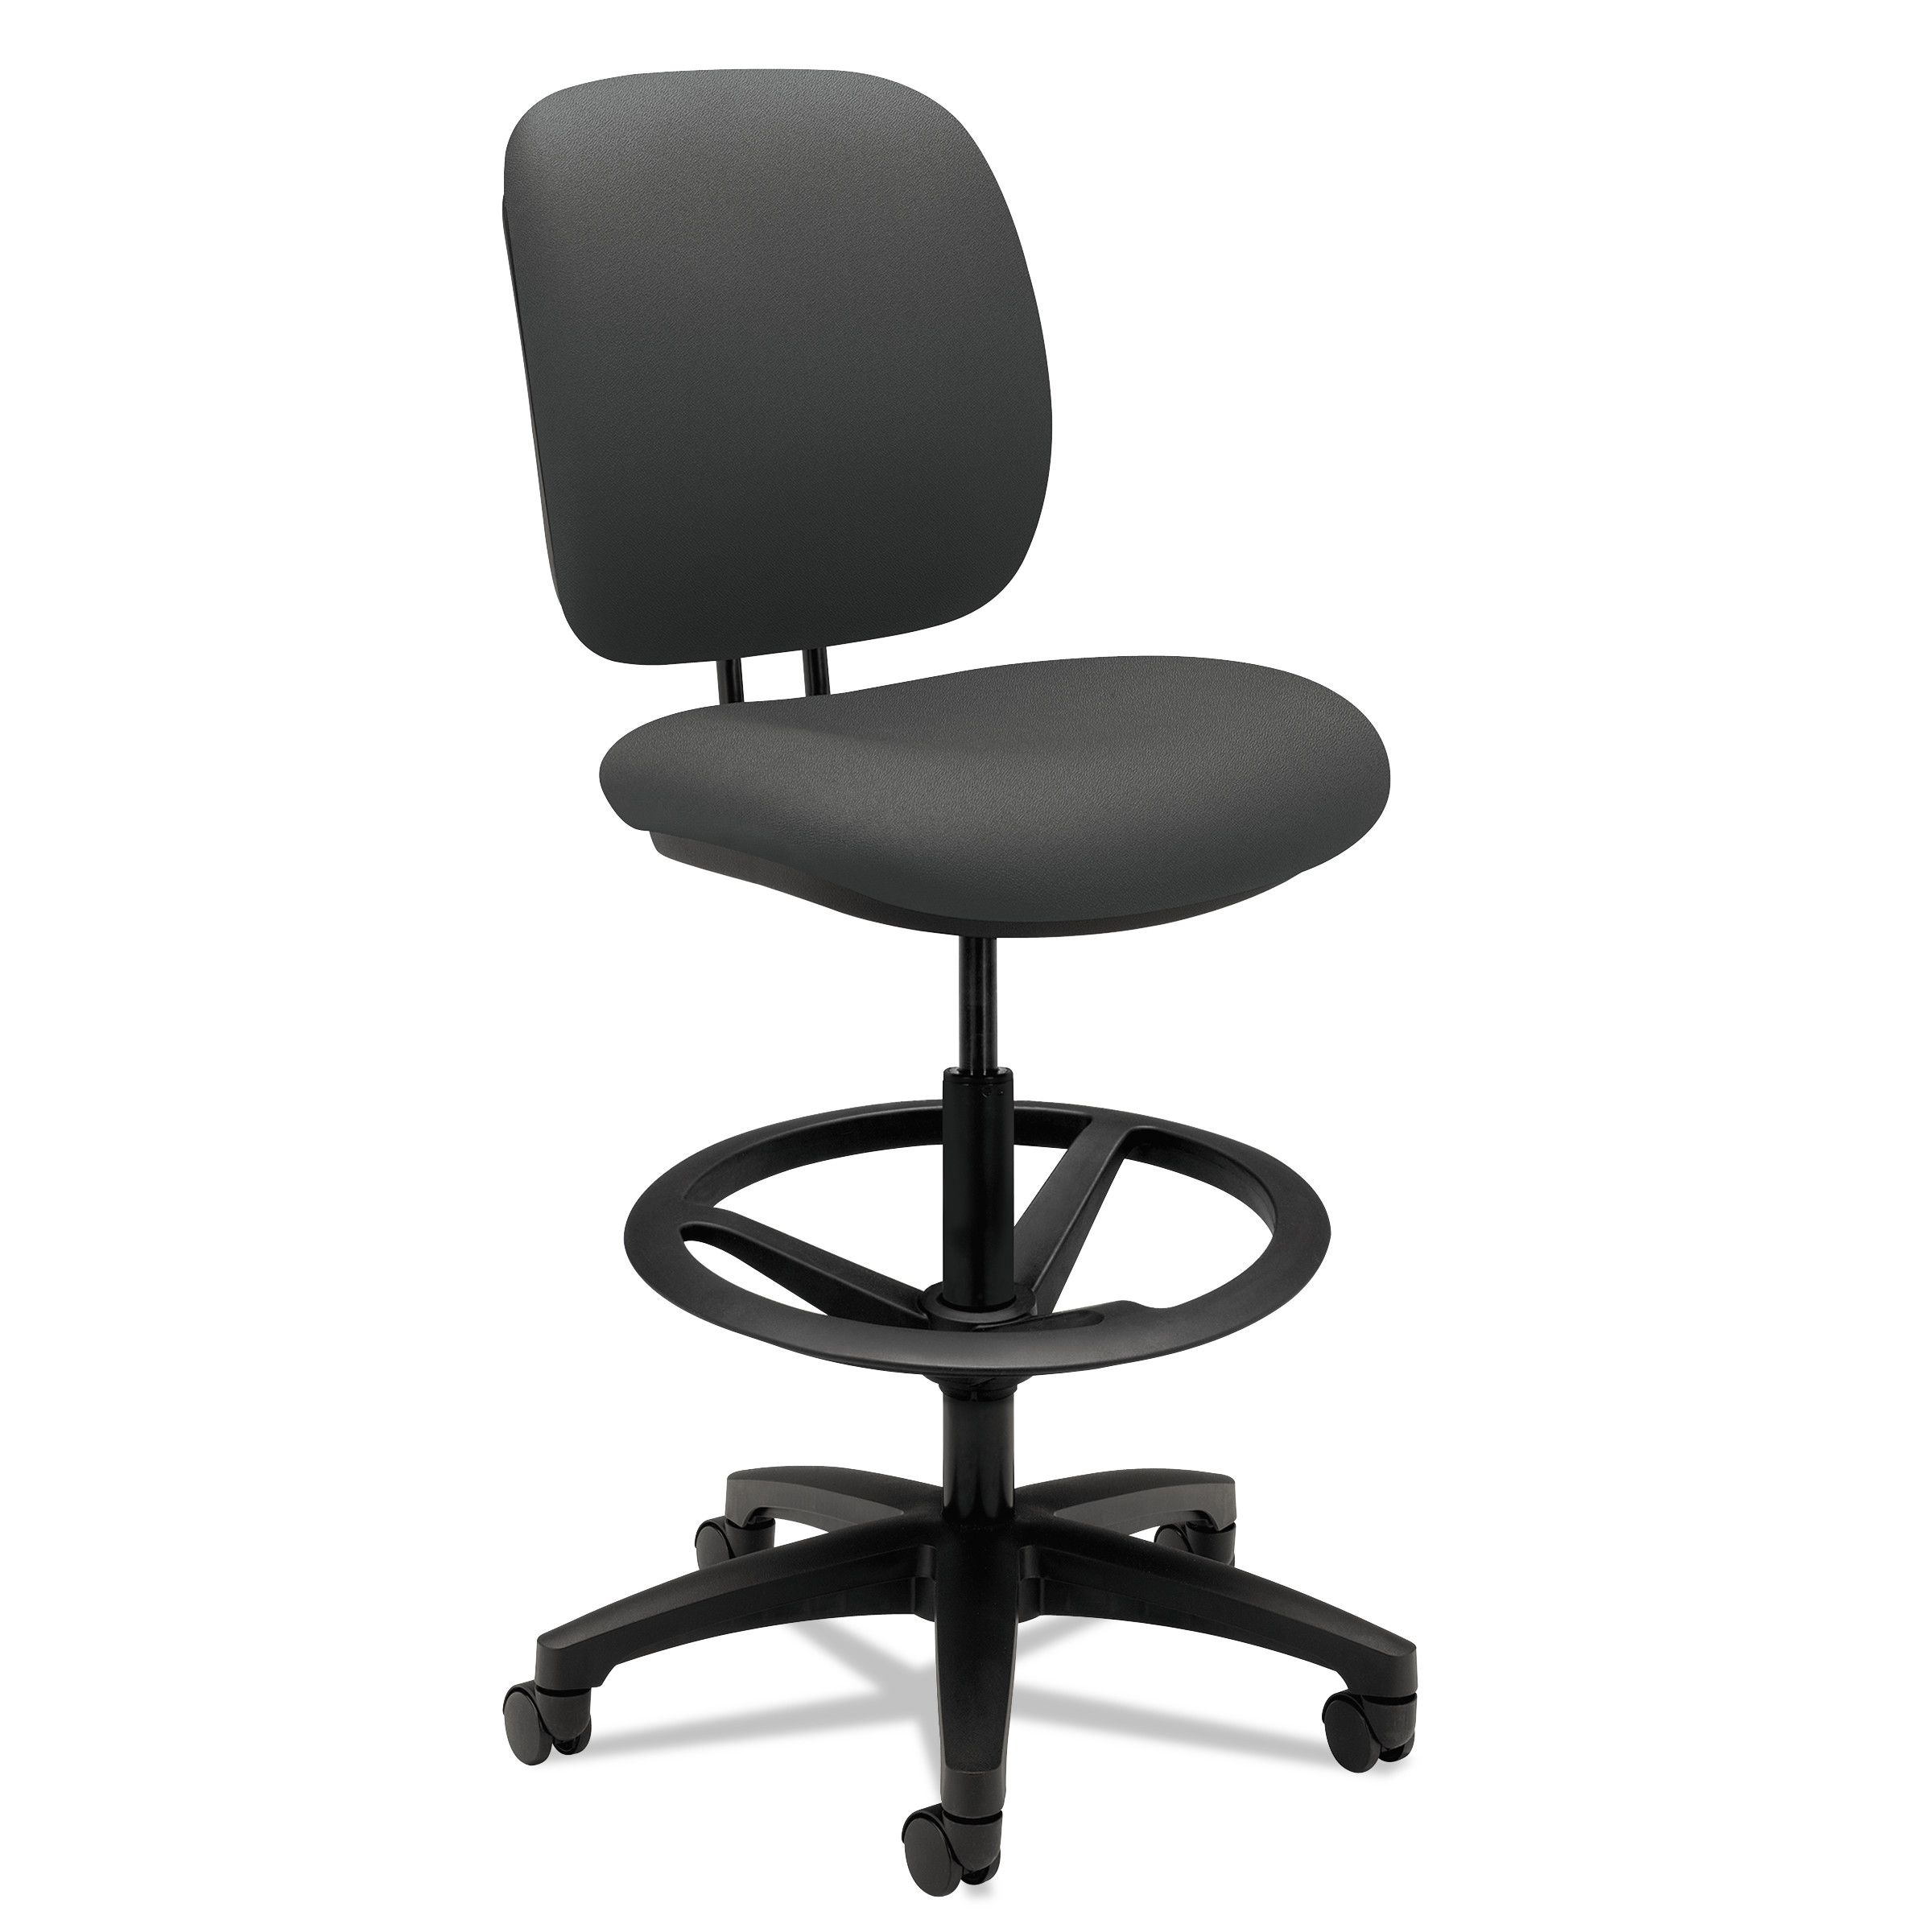  HON H5905.H.CU19.T ComforTask Task Stool with Adjustable Footring, 32 Seat Height, Supports up to 300 lbs, Iron Ore Seat/Back, Black Base (HON5905CU19T) 